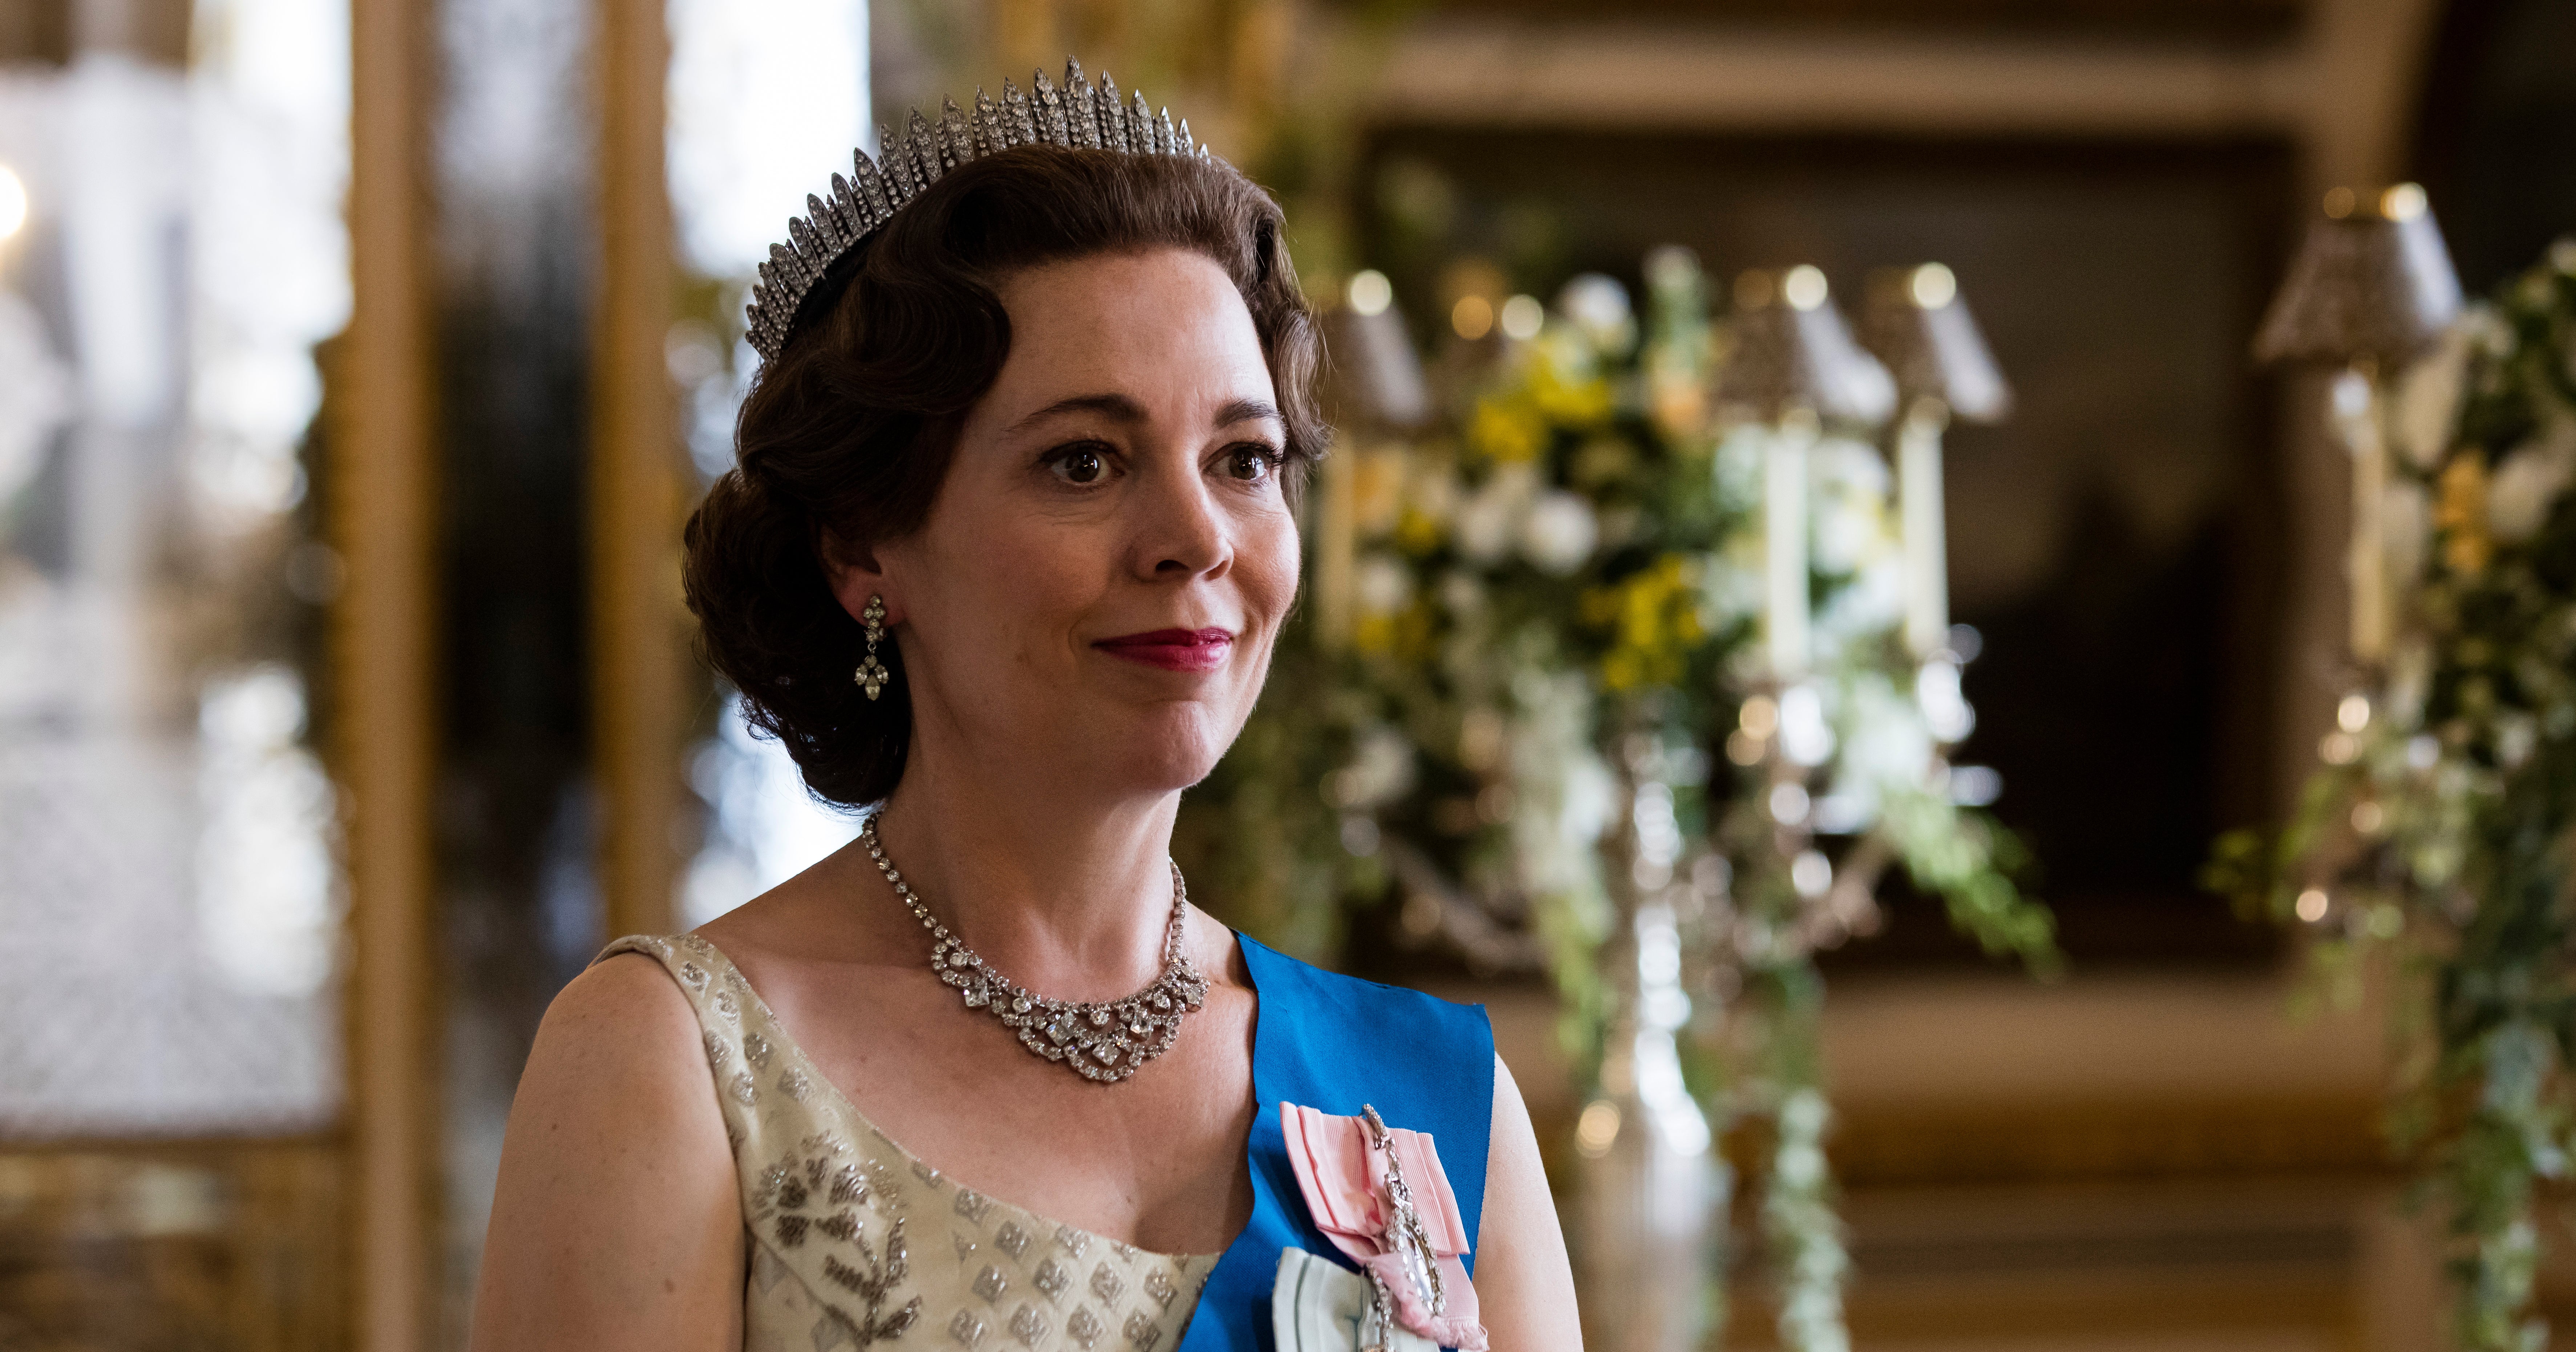 Julia Crown - The Crown Season 4 Questions Answered Cast, Date, Plot